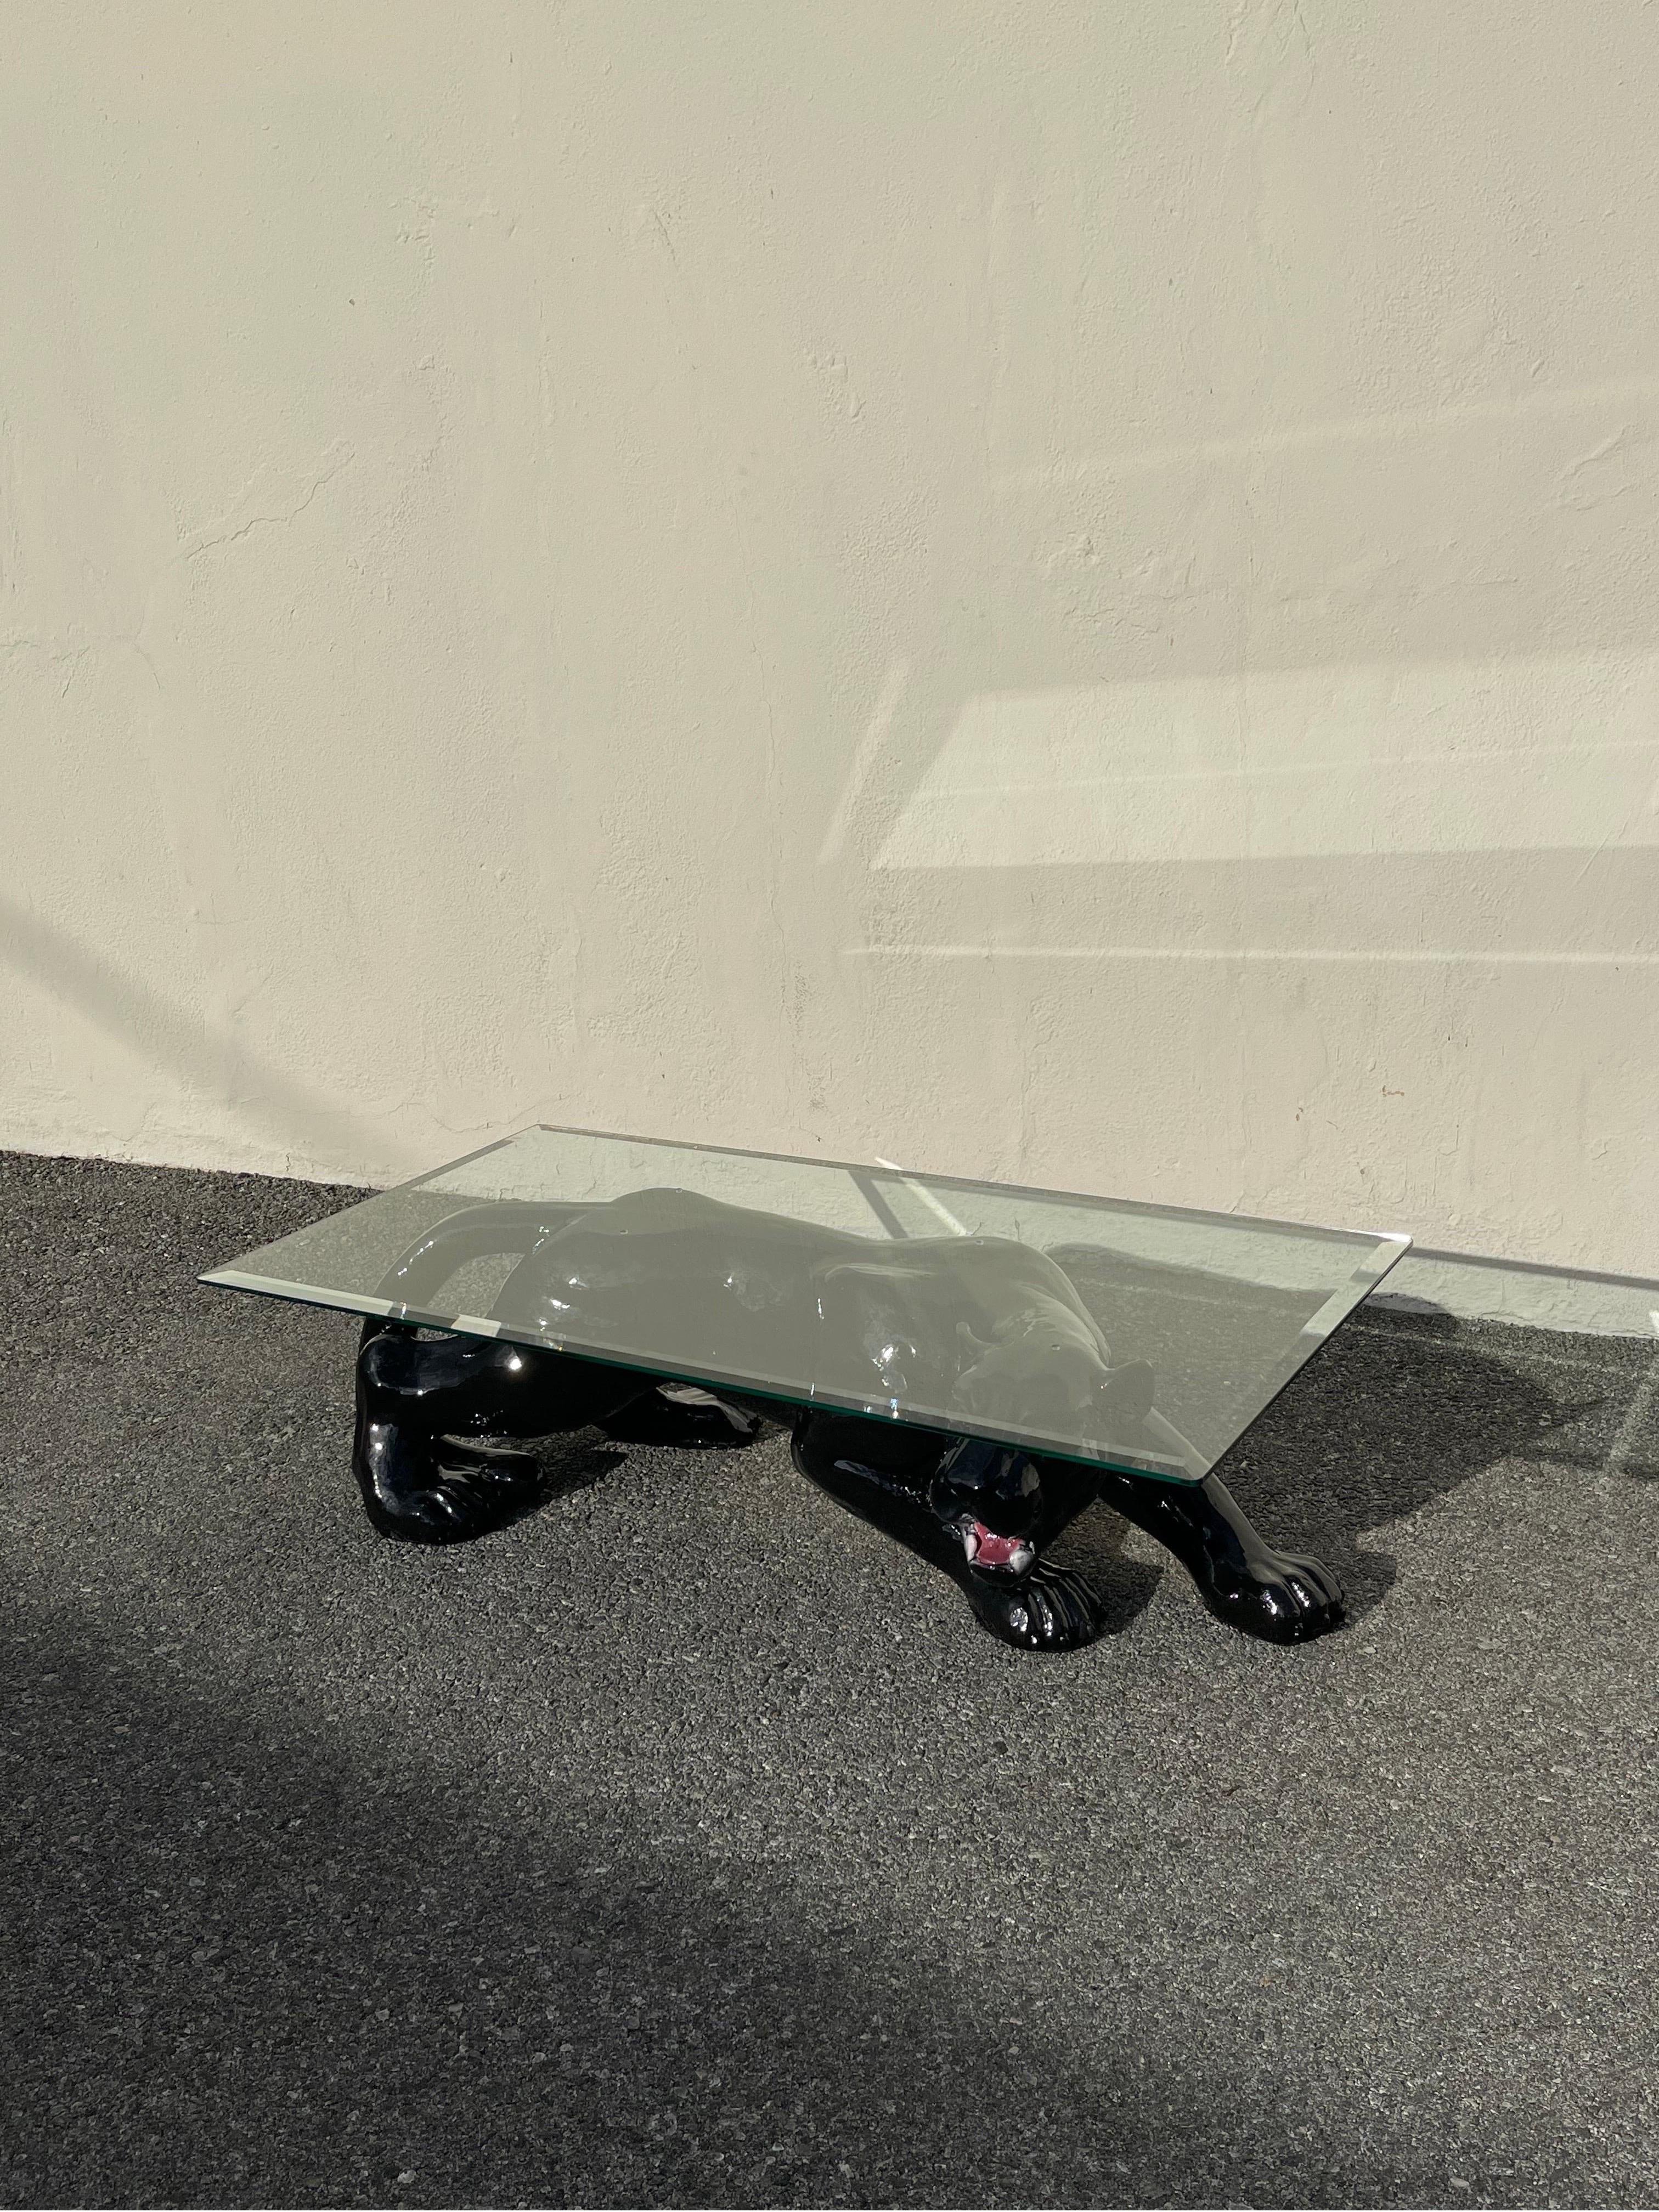 Vintage ceramic and glass panther coffee table. Origin: Circa 1980’s. In excellent condition with some minor scratches to glass, consistent with age